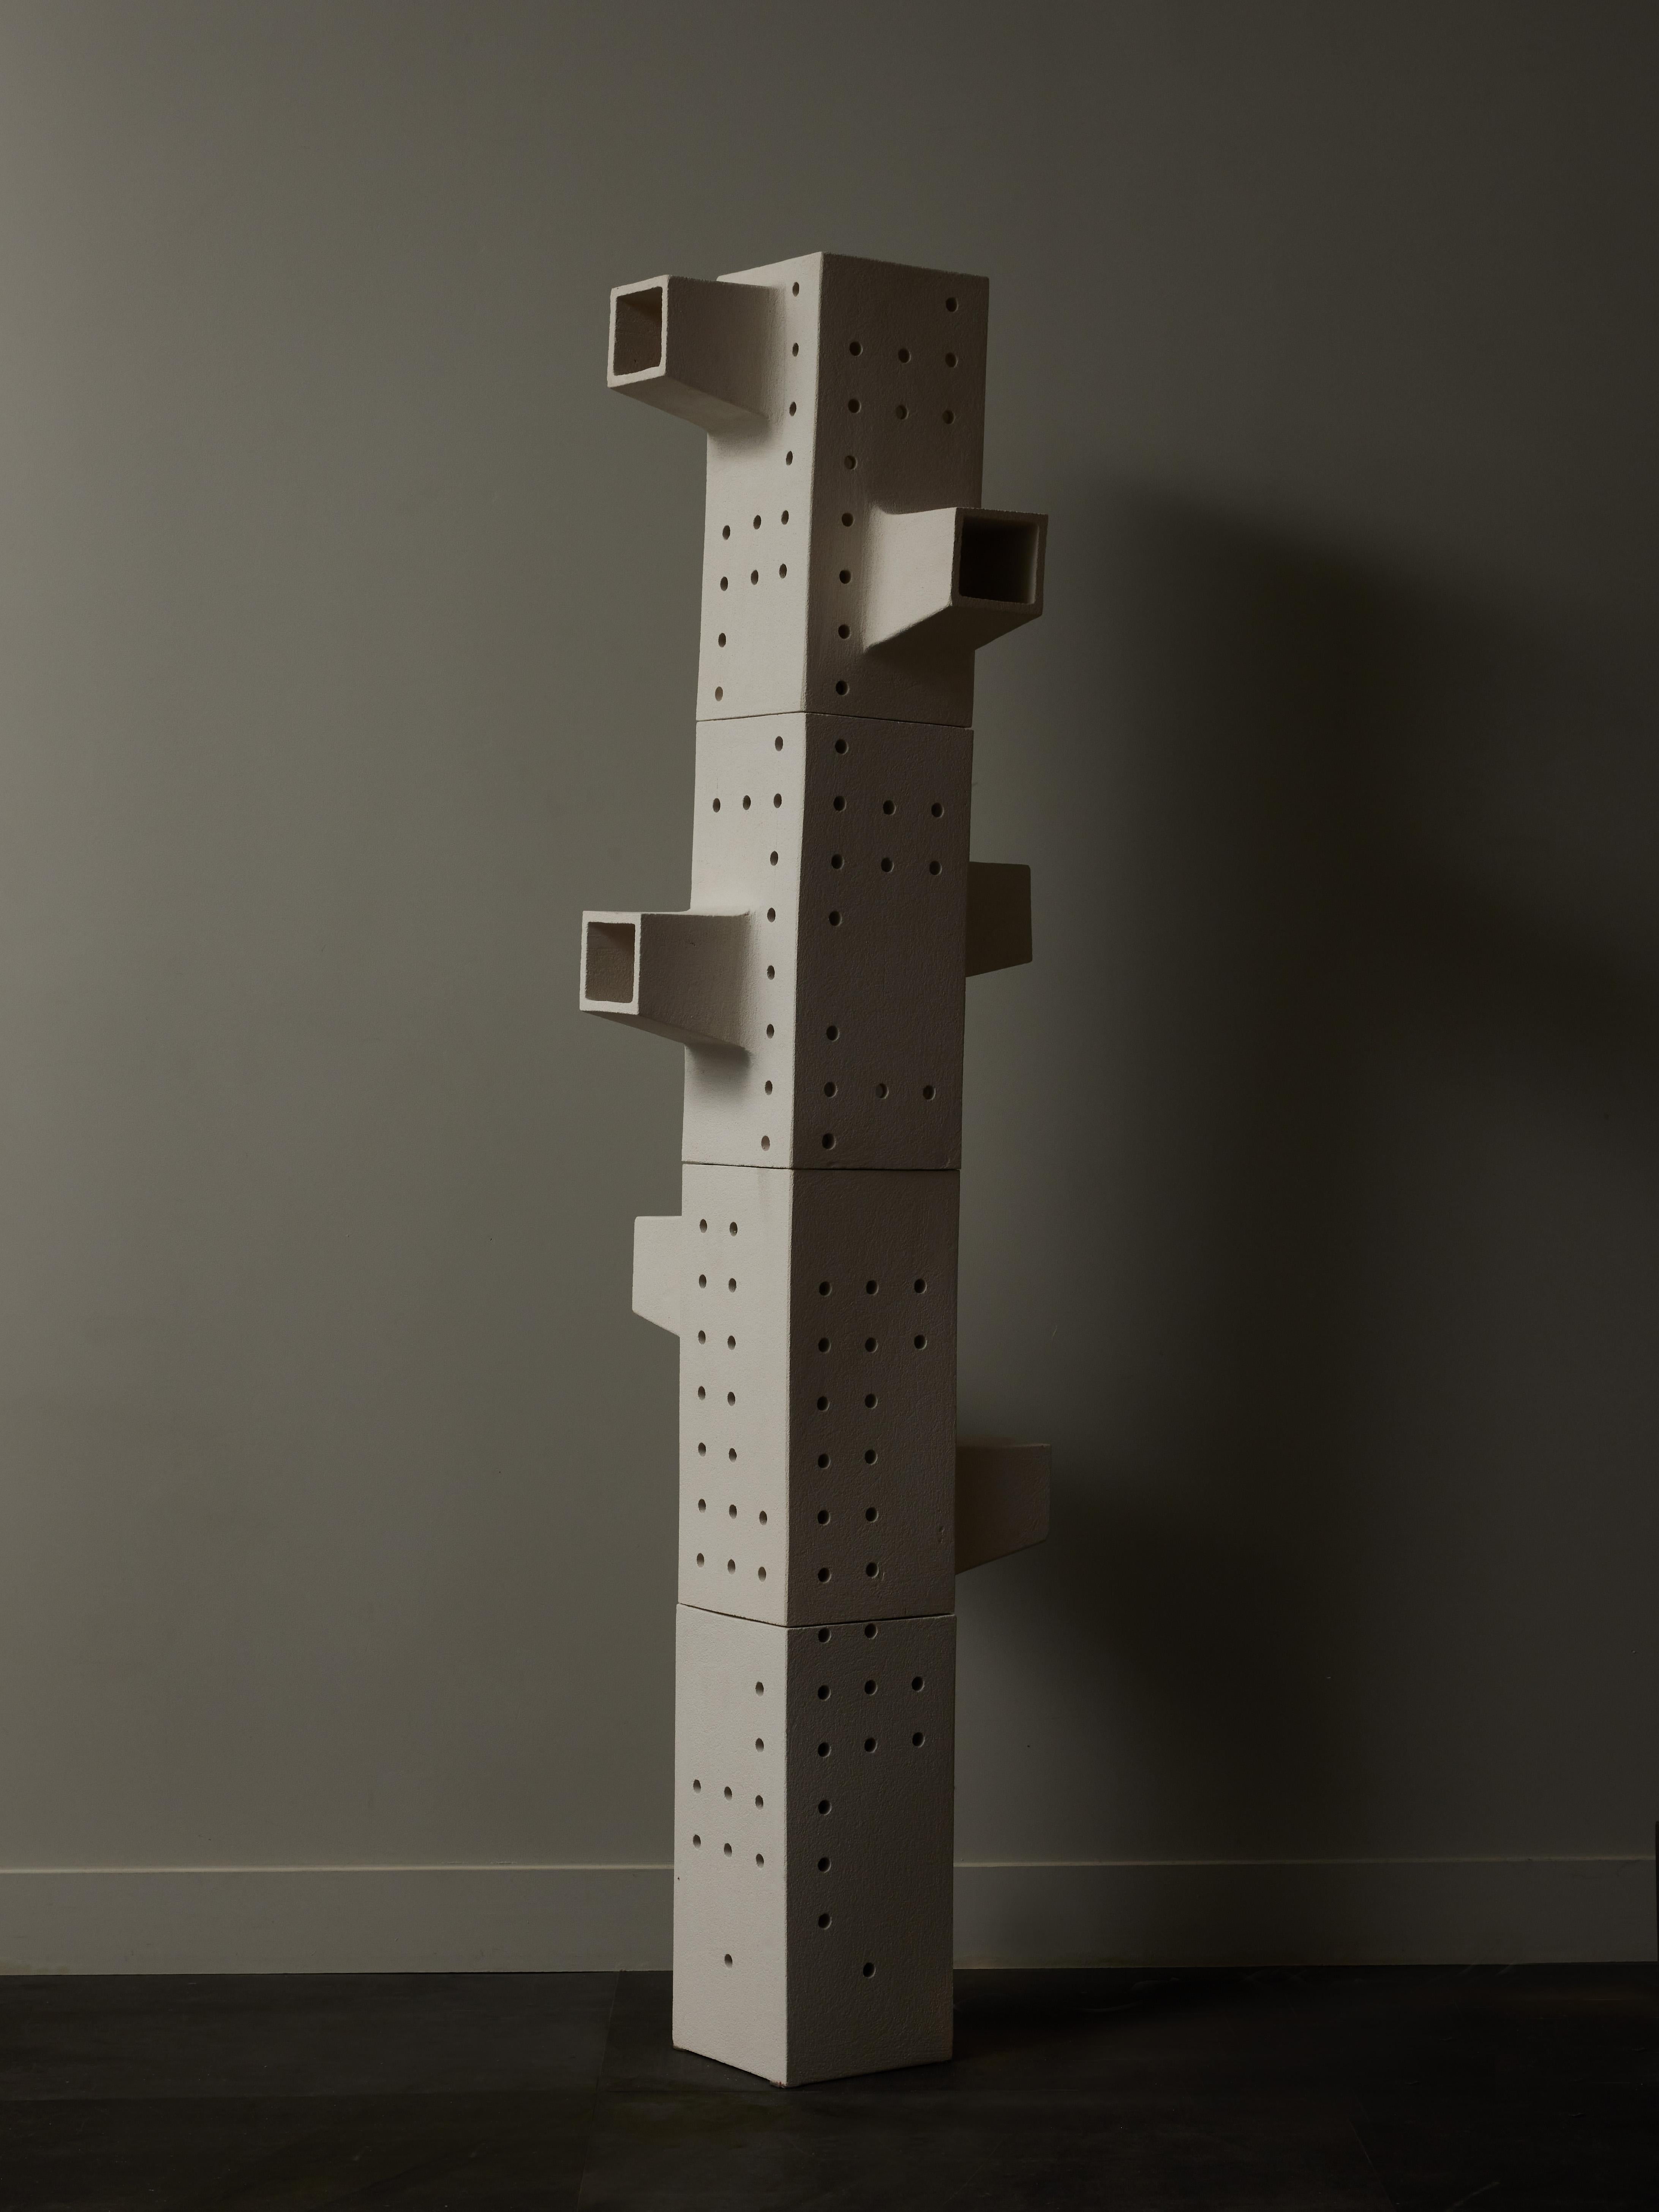 Modular floor lamp made of four rectangular ceramic pieces with hole decors letting the light go through
Made by the french contemporary ceramist Frederic Bourdiec